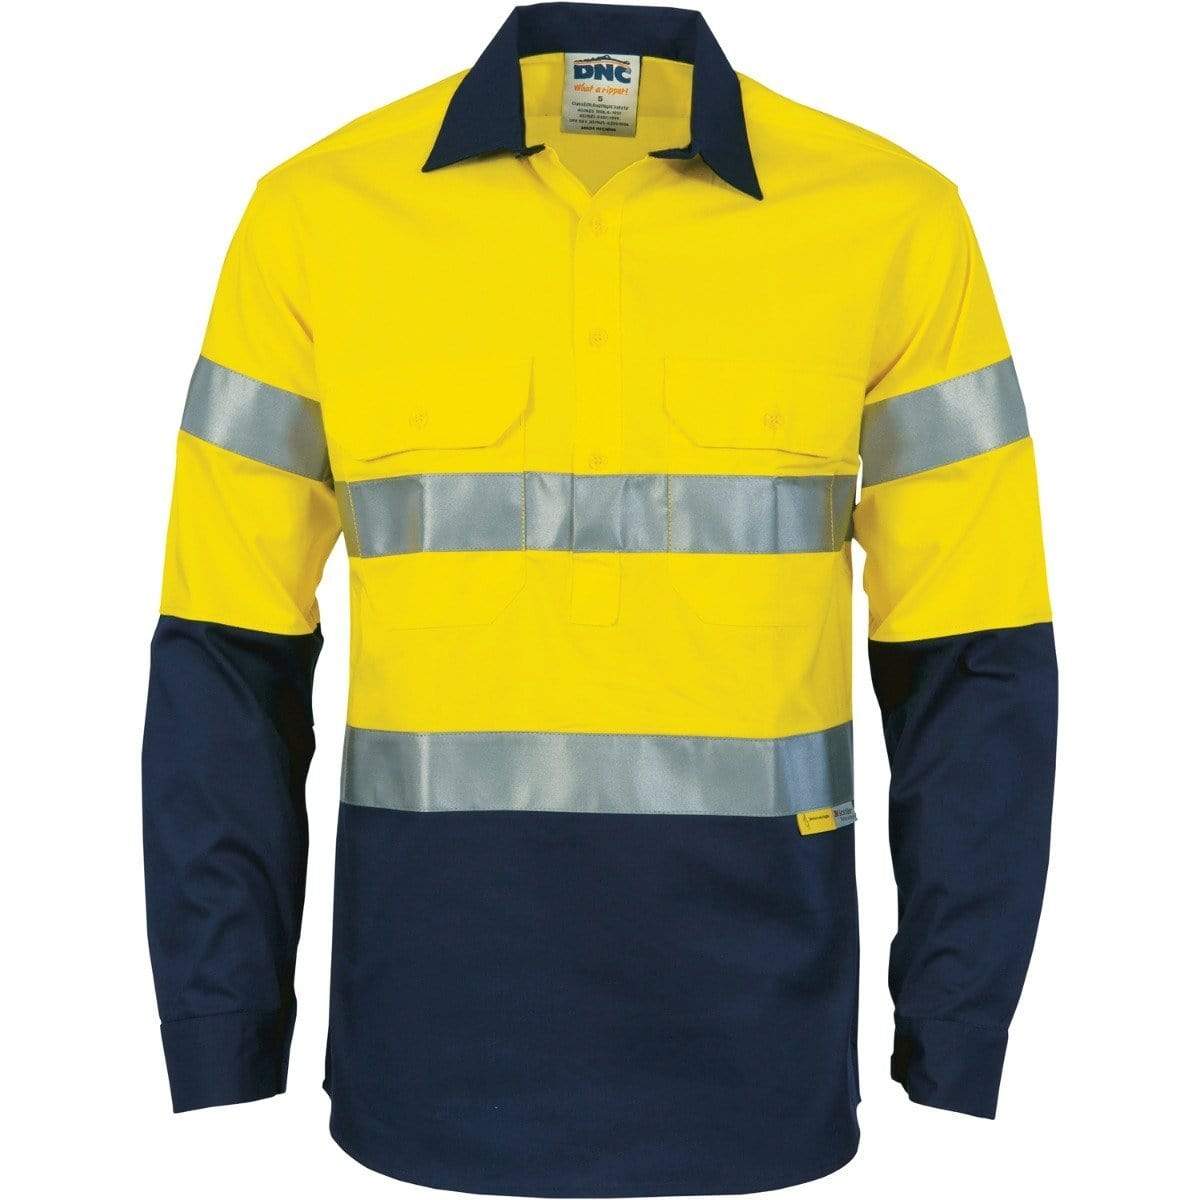 Dnc Workwear Hi-vis Two-tone Closed Front Cotton Shirt With 3m R/tape - 3849 Work Wear DNC Workwear Yellow/Navy S 